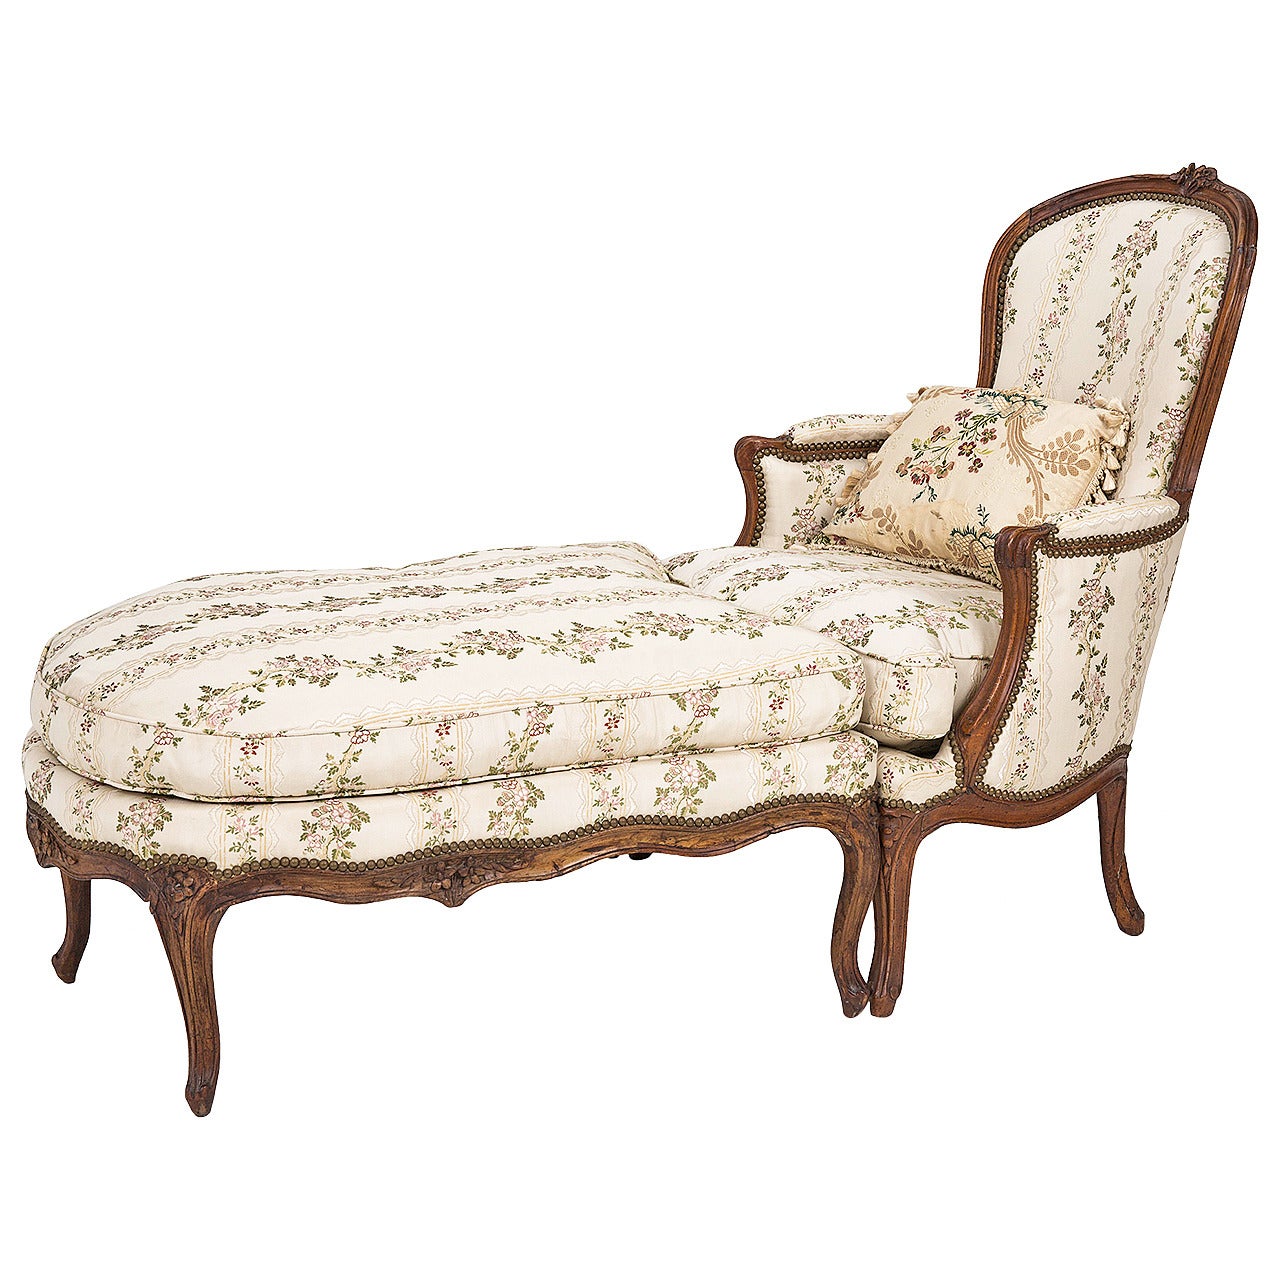 Louis XV Chair and Ottoman Chaise Lounge For Sale